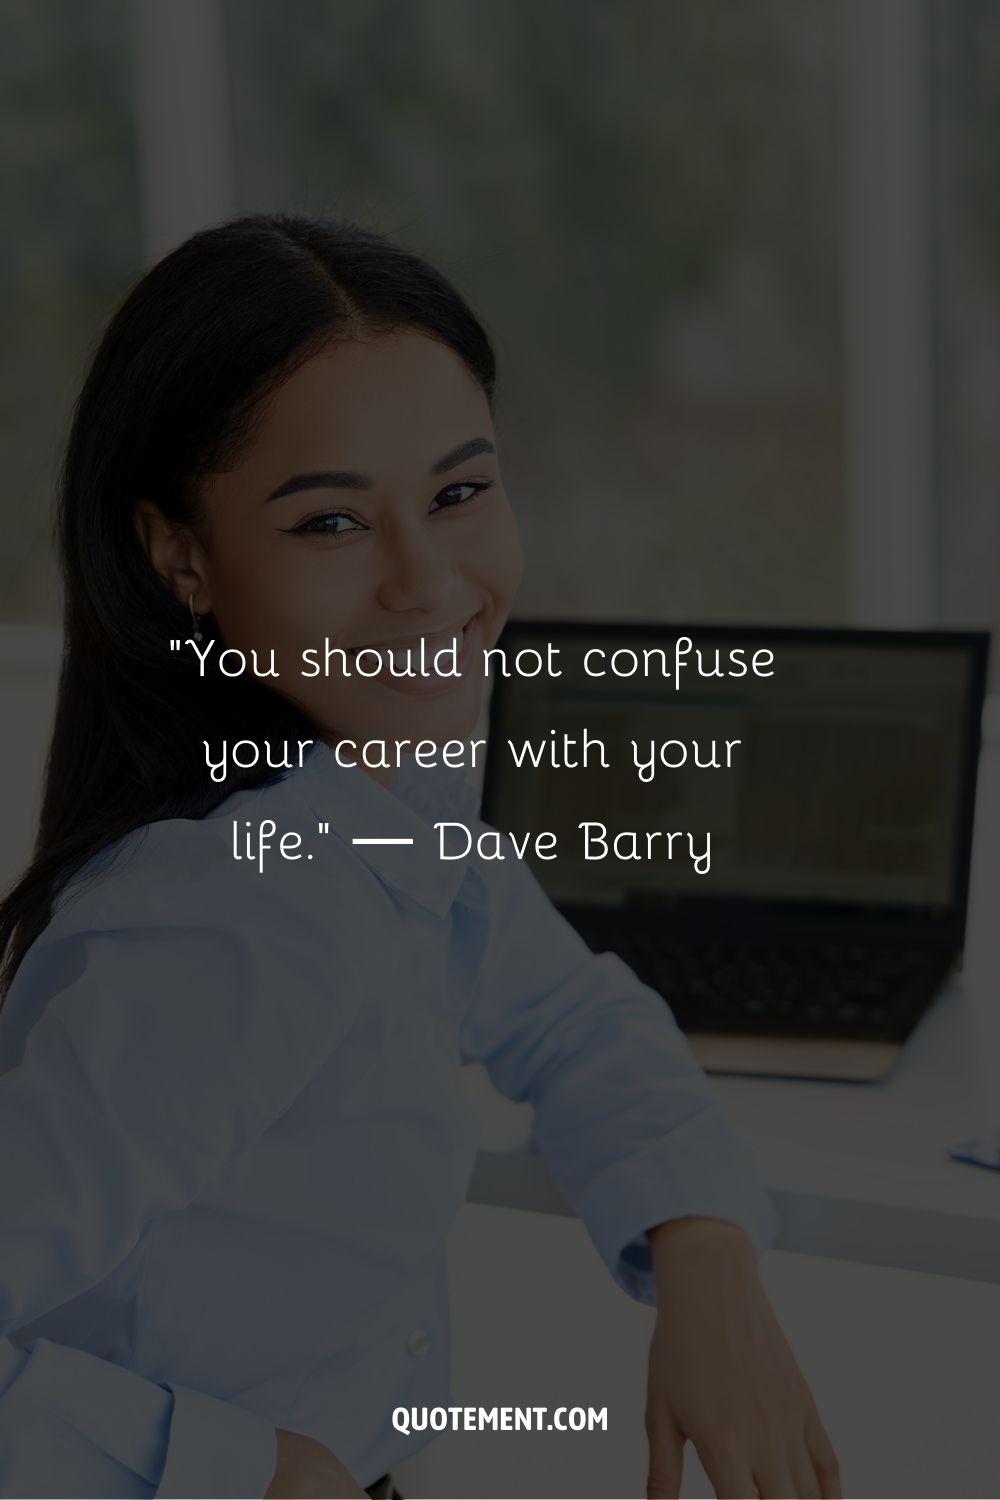 “You should not confuse your career with your life.” ― Dave Barry